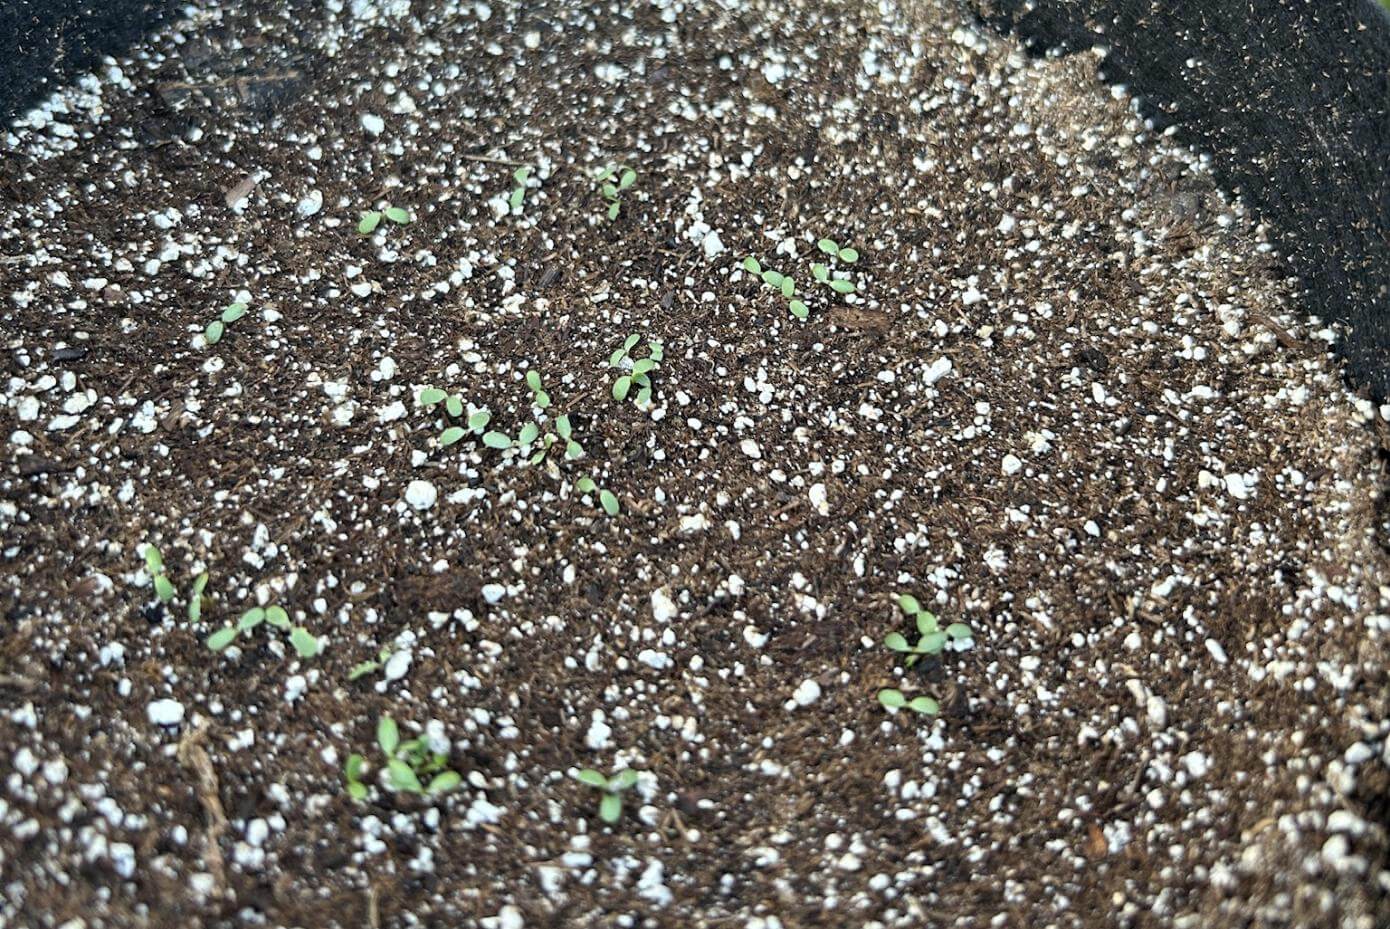 Marco Polo White Clover shoots in a pot, 6 days after planting.